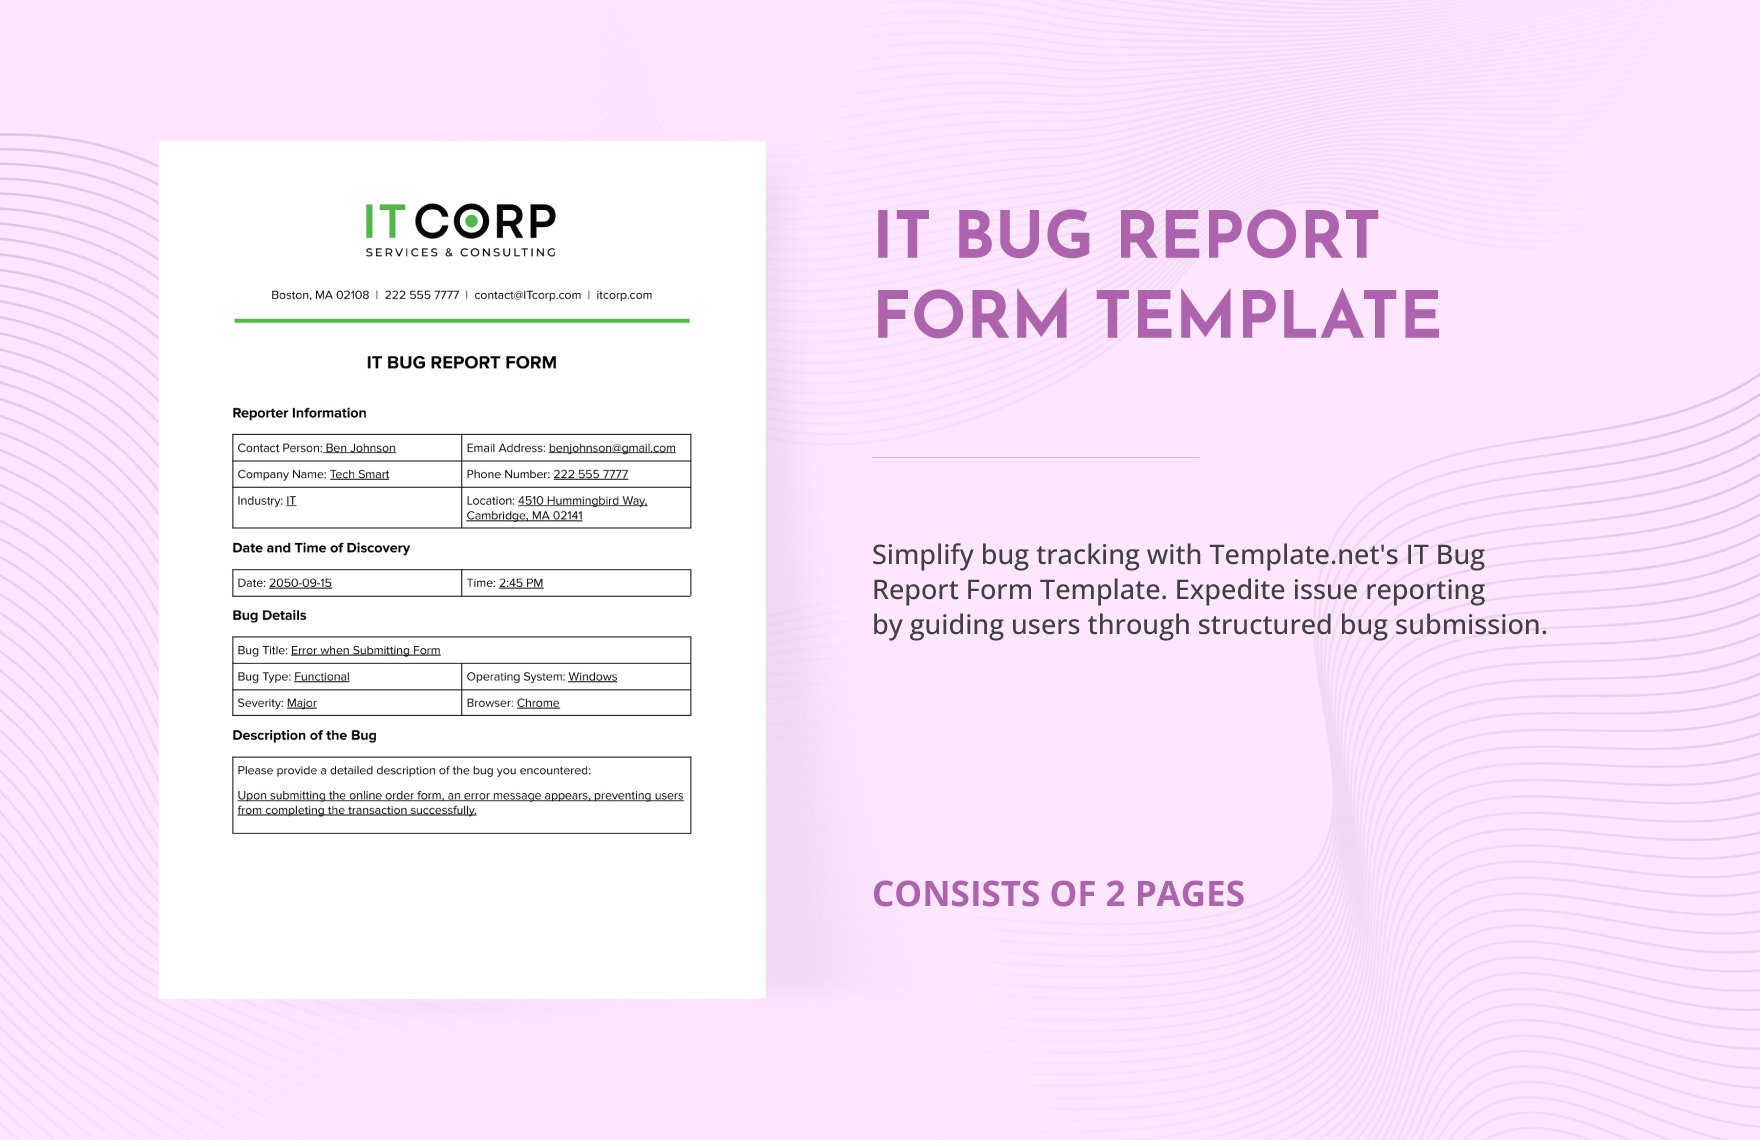 IT Bug Report Form Template in Word, Google Docs, PDF